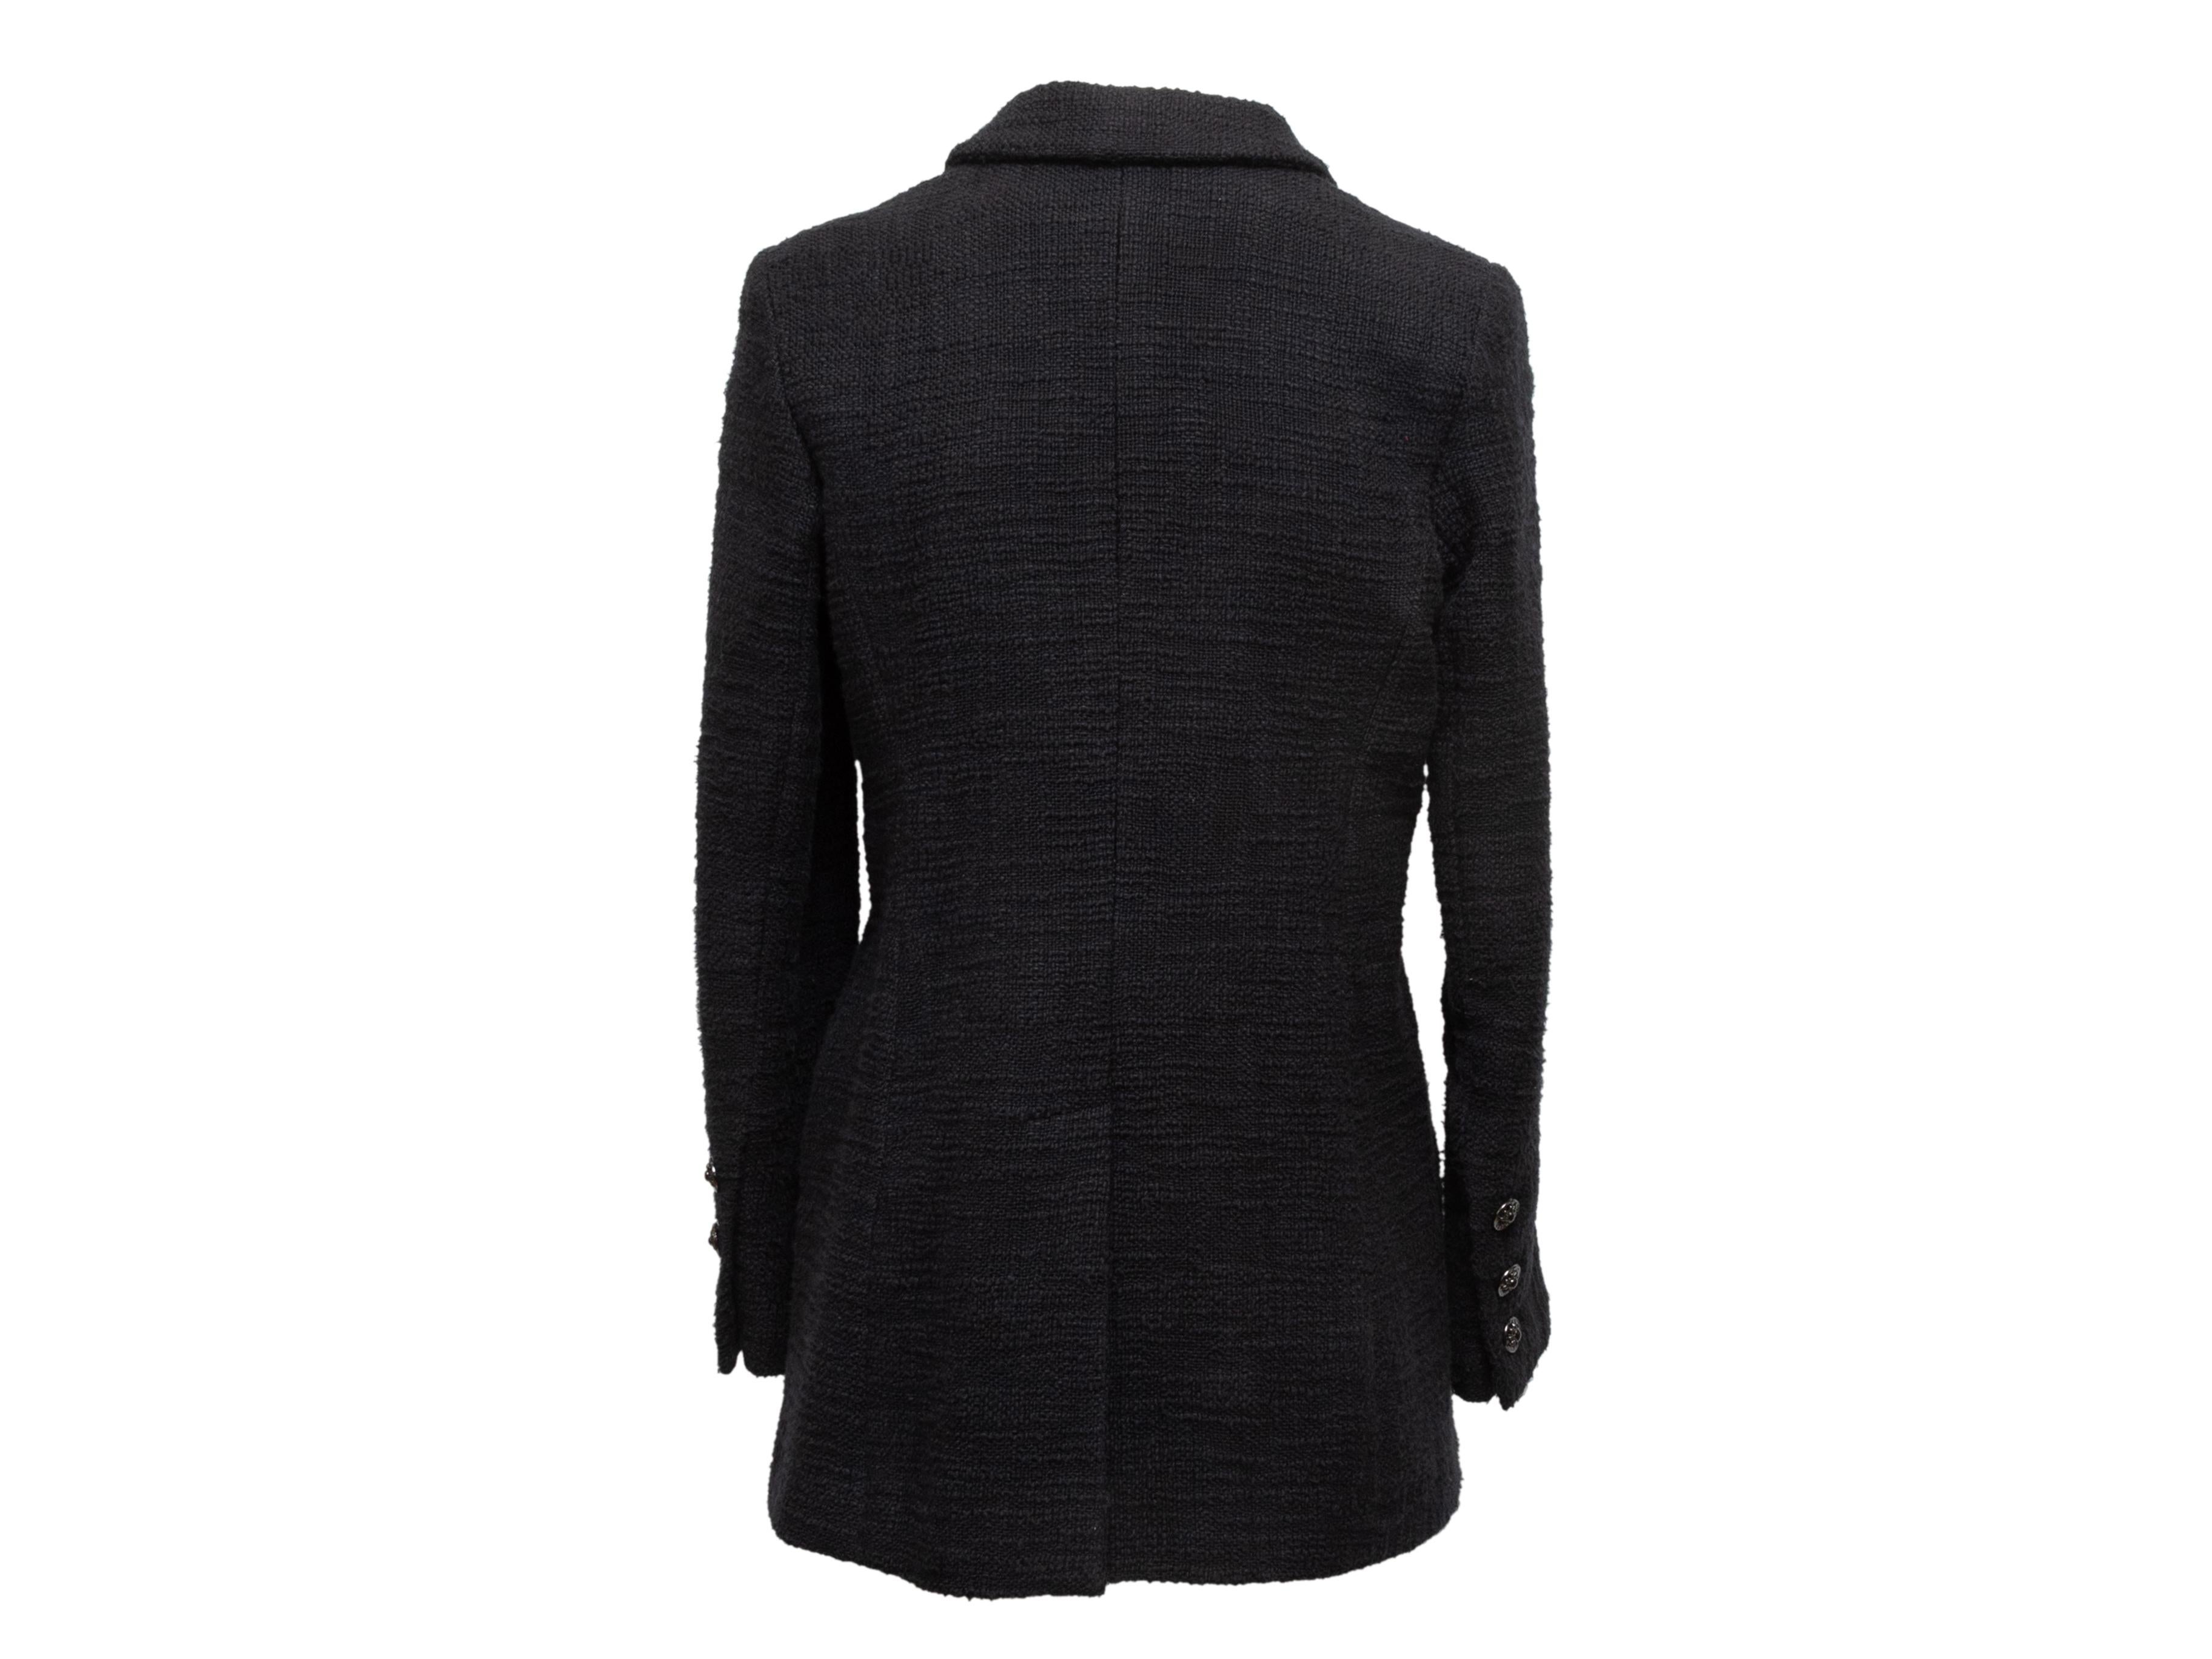 Black cotton tweed blazer by Chanel. From the Spring 2000 Collection. Notched lapel. Three welt pockets. Button closures at center front. Designer size 38. 36